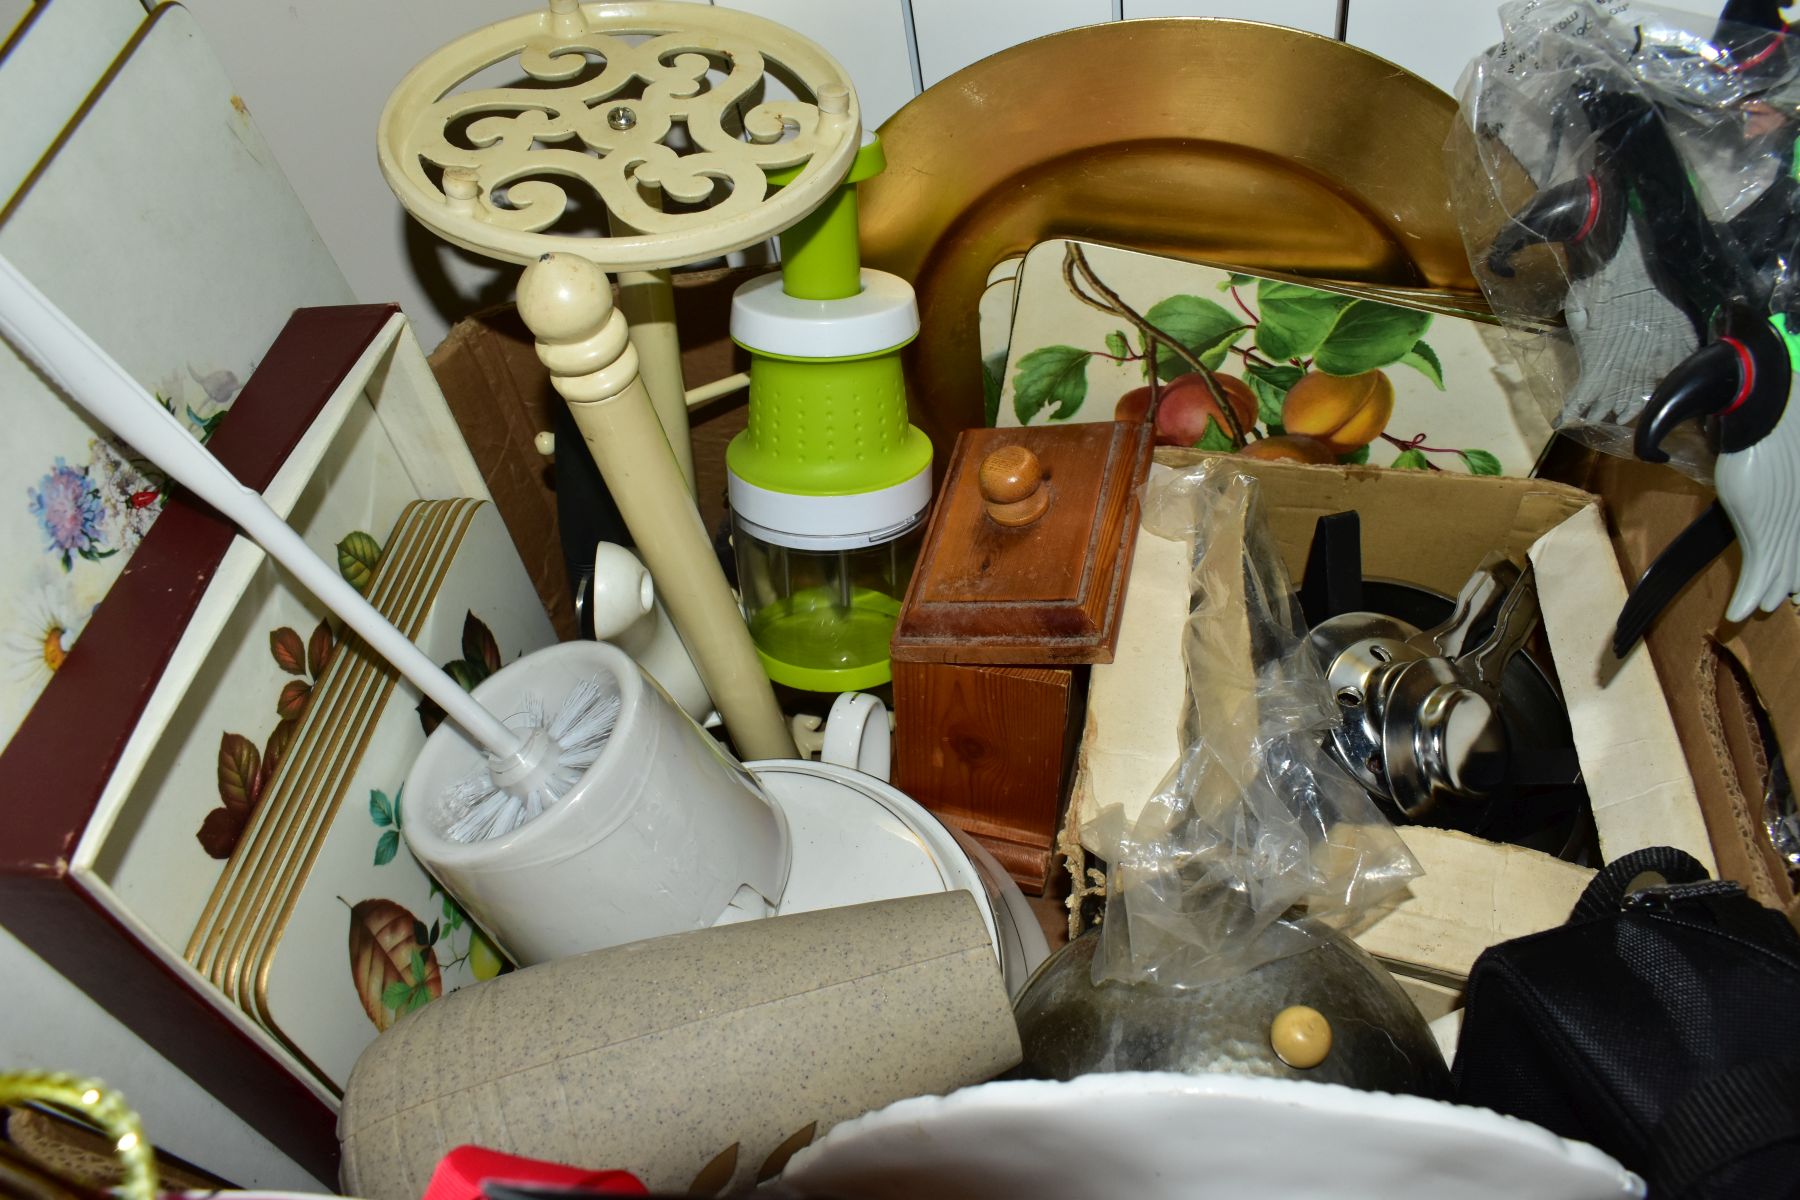 FOUR BOXES AND LOOSE OF SPORTING EQUIPMENT, HOUSEHOLD SUNDRIES, NOVELTY/PARTY ITEMS, CDS, DVDS, etc, - Image 7 of 13